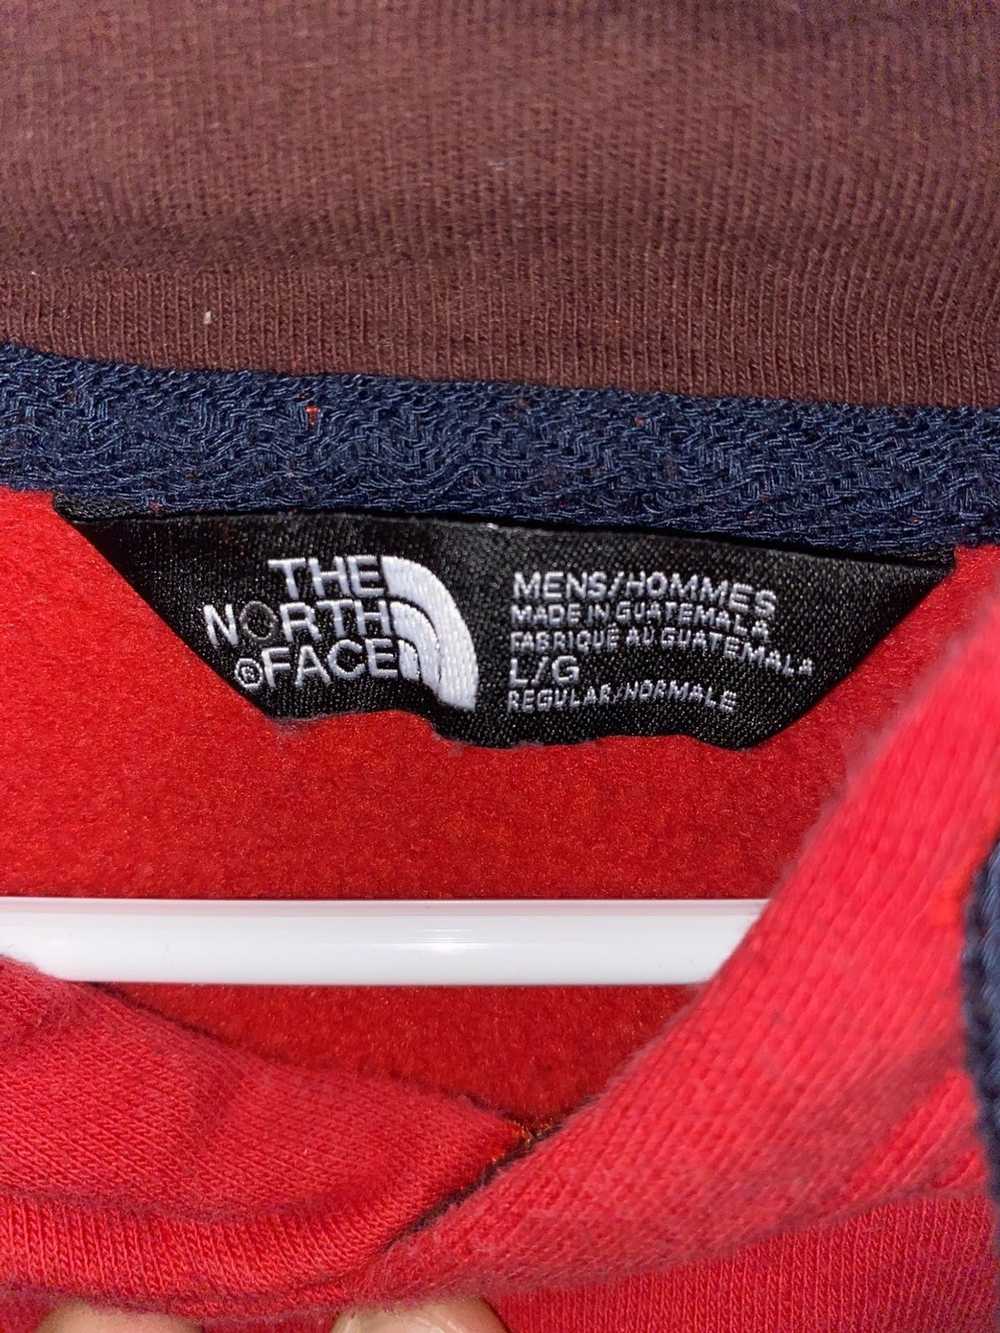 The North Face The North Face Mountain Logo Hoodie - image 3